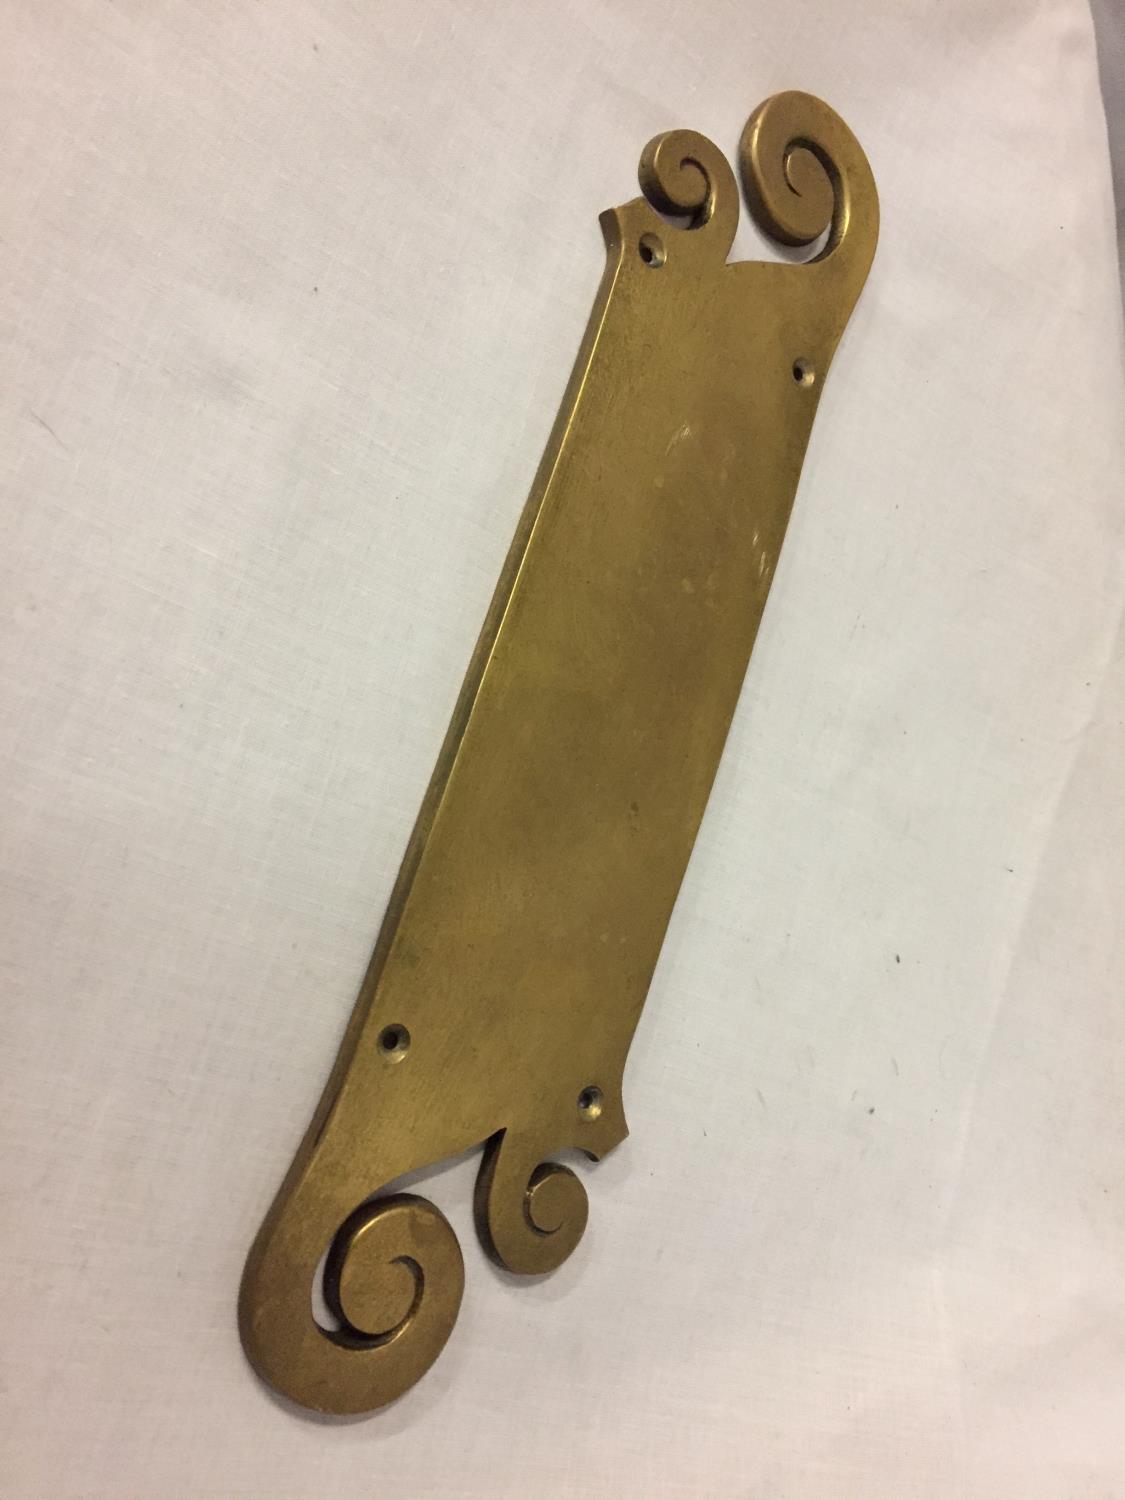 A BRASS DOOR FINGER PLATE LENGTH 13 INCHES/33CM - Image 2 of 2